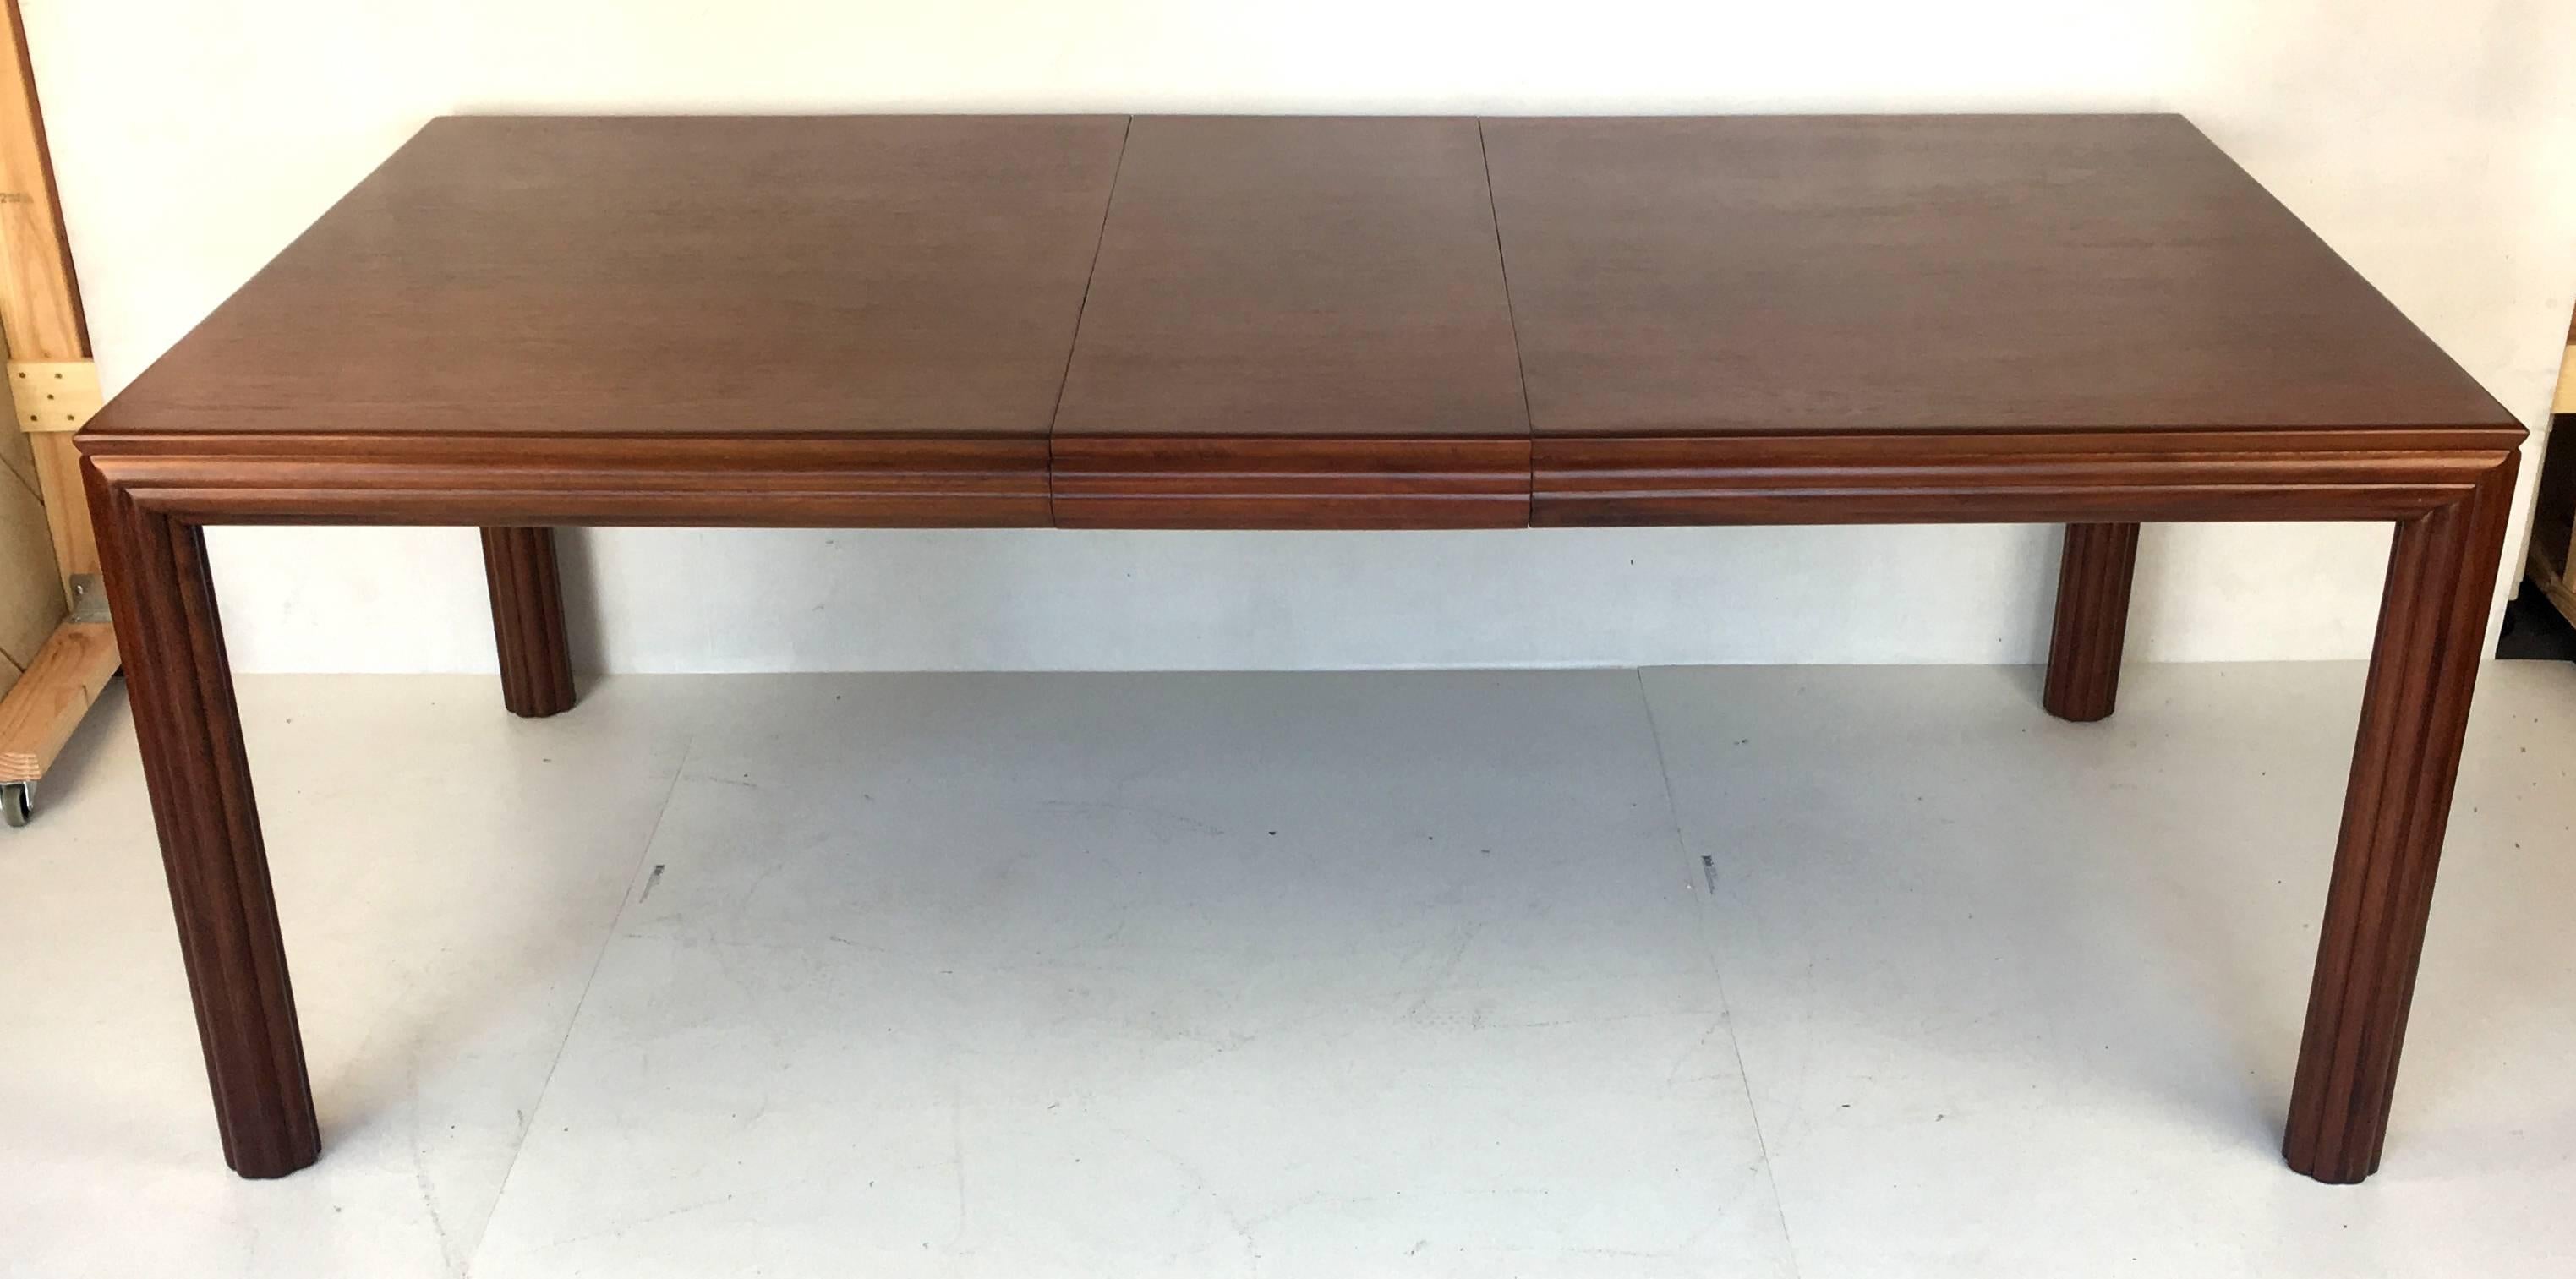 Finely crafted rift oak dining table by Johan Tapp. Comes with one leaf. Refinished. Measures: 82" long with its single 16" leaf.  All work done with painstaking attention to detail at our in-house workroom.  